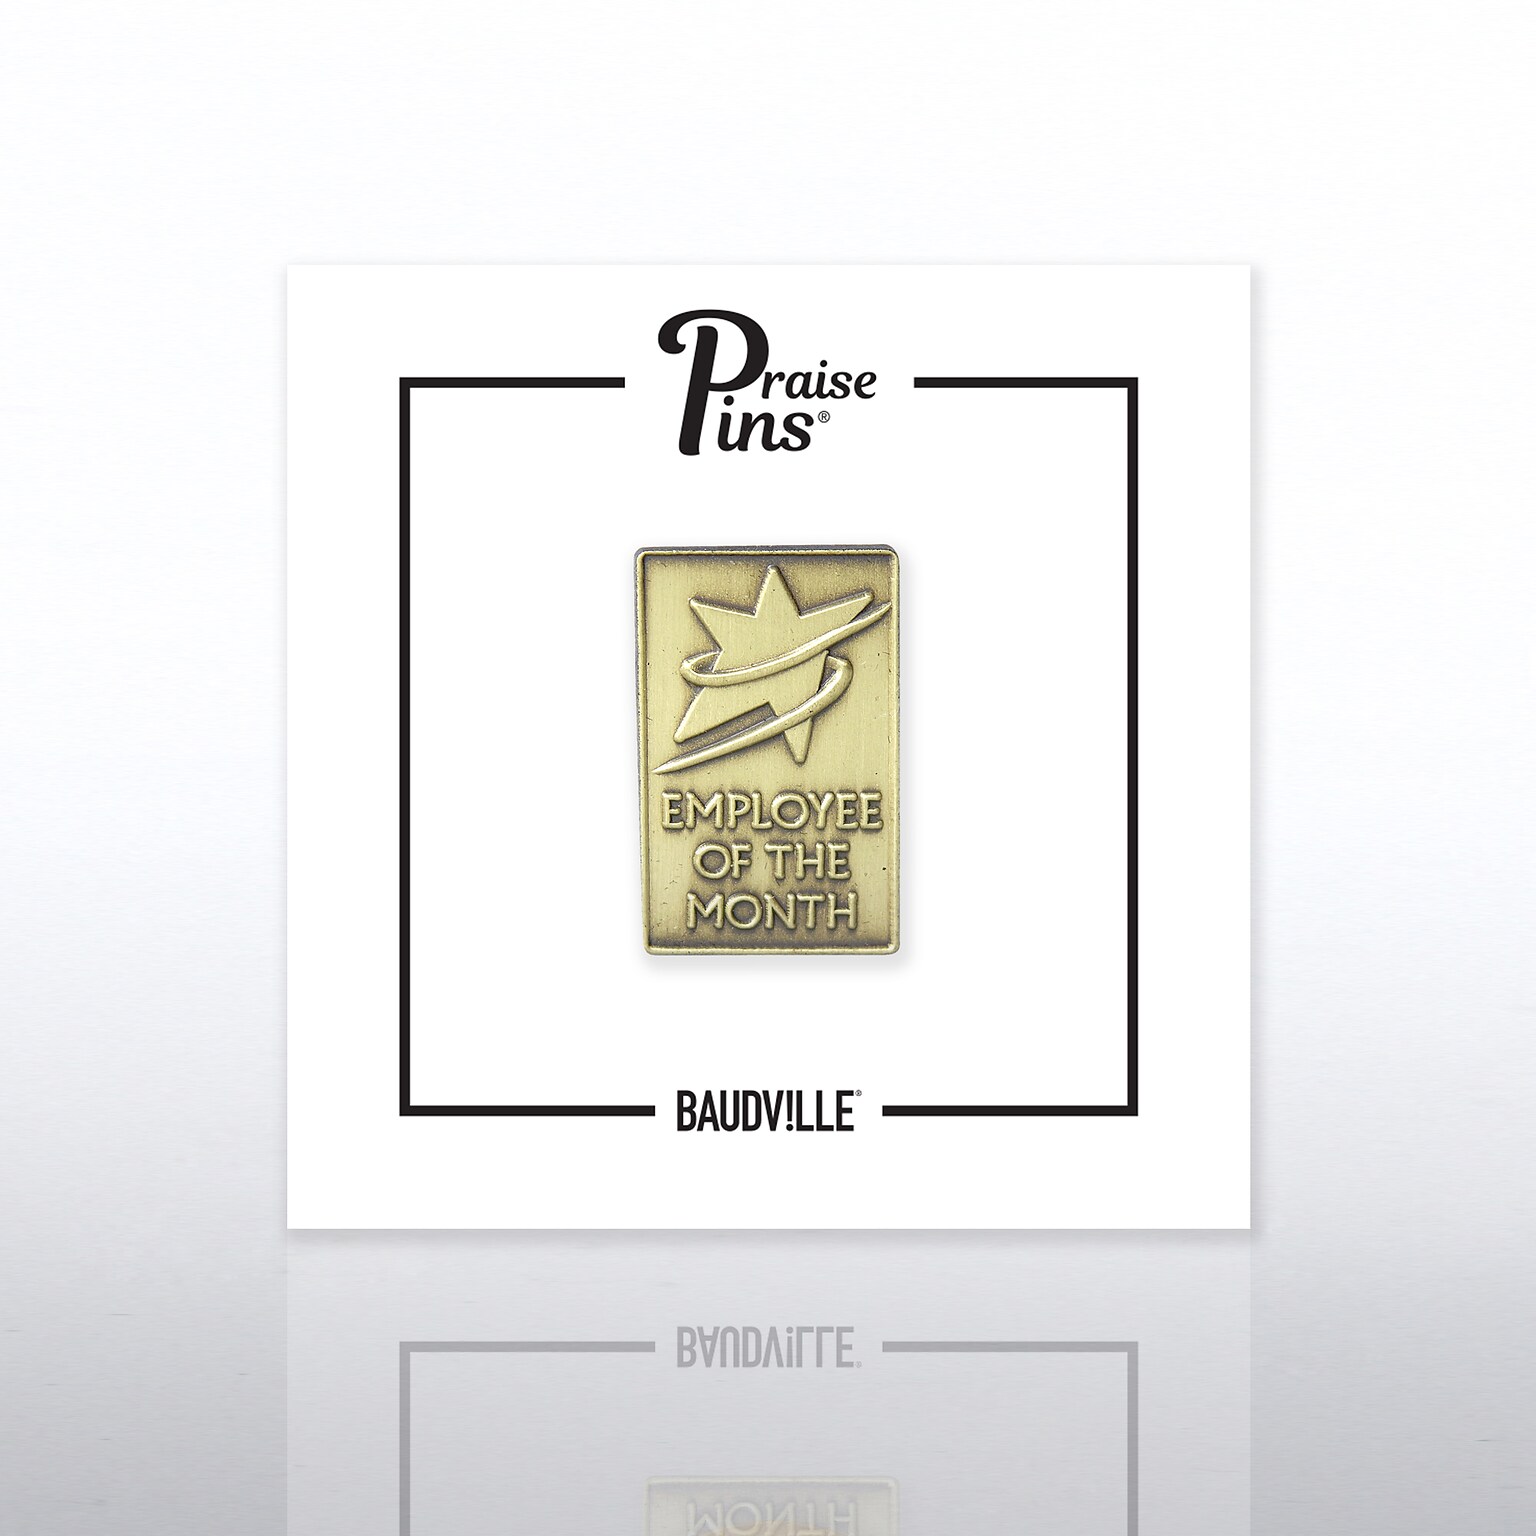 Baudville® Lapel Pin, Employee of the Month